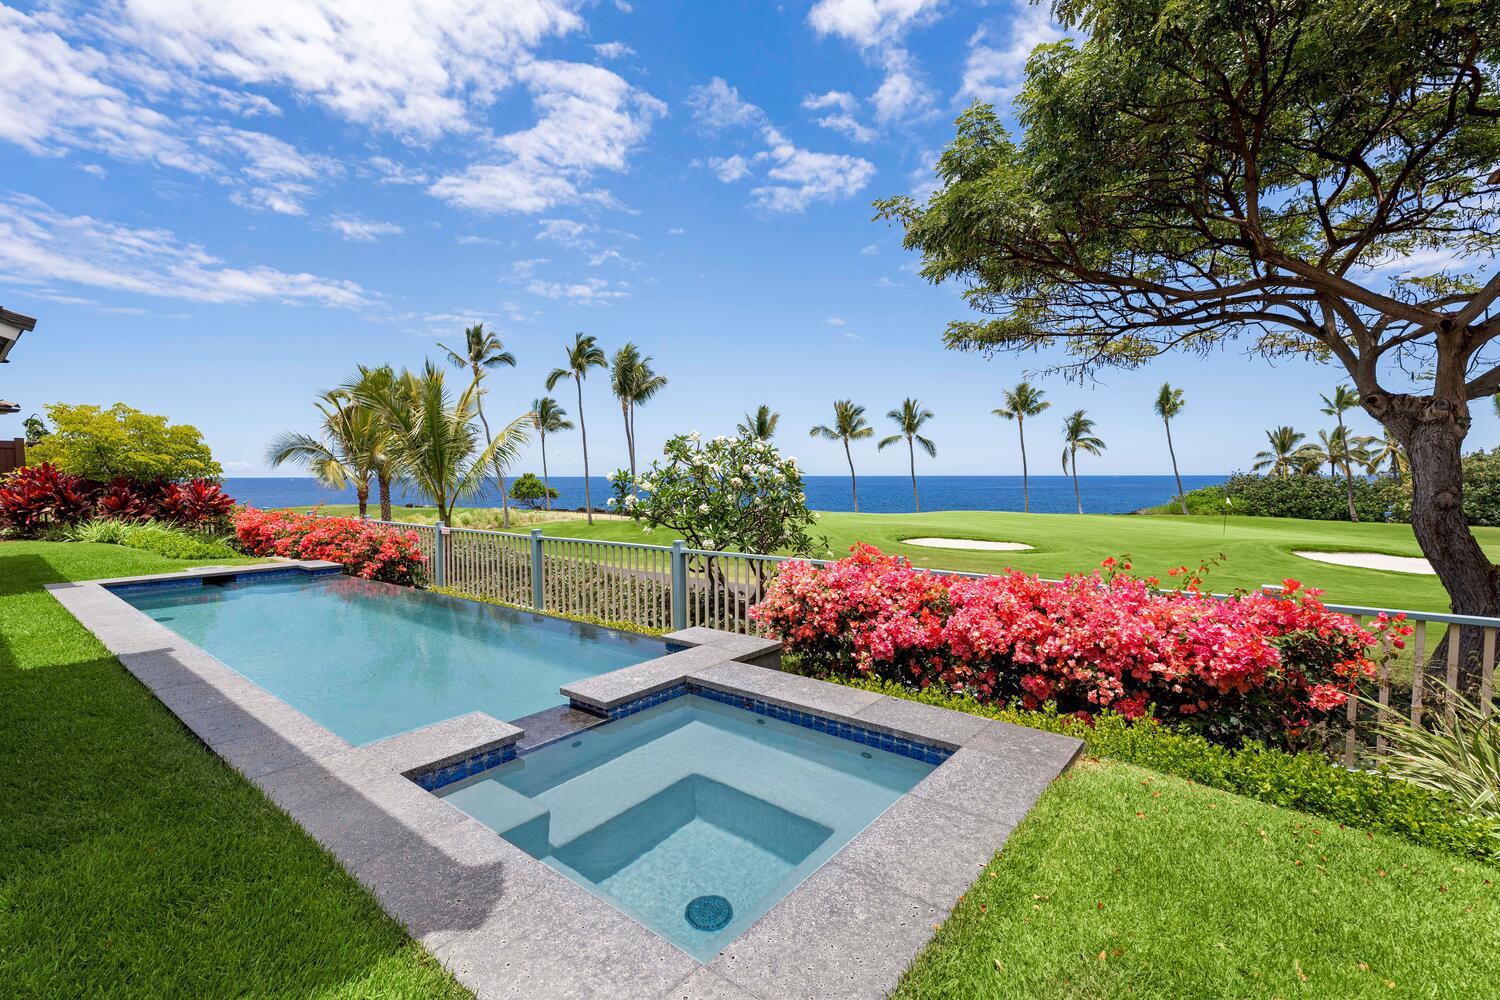 Kailua-Kona Vacation Rentals, Holua Kai #26 - This stunning backyard oasis features a sparkling pool and hot tub, framed by lush tropical landscaping and a breathtaking view of the oceanfront golf course.